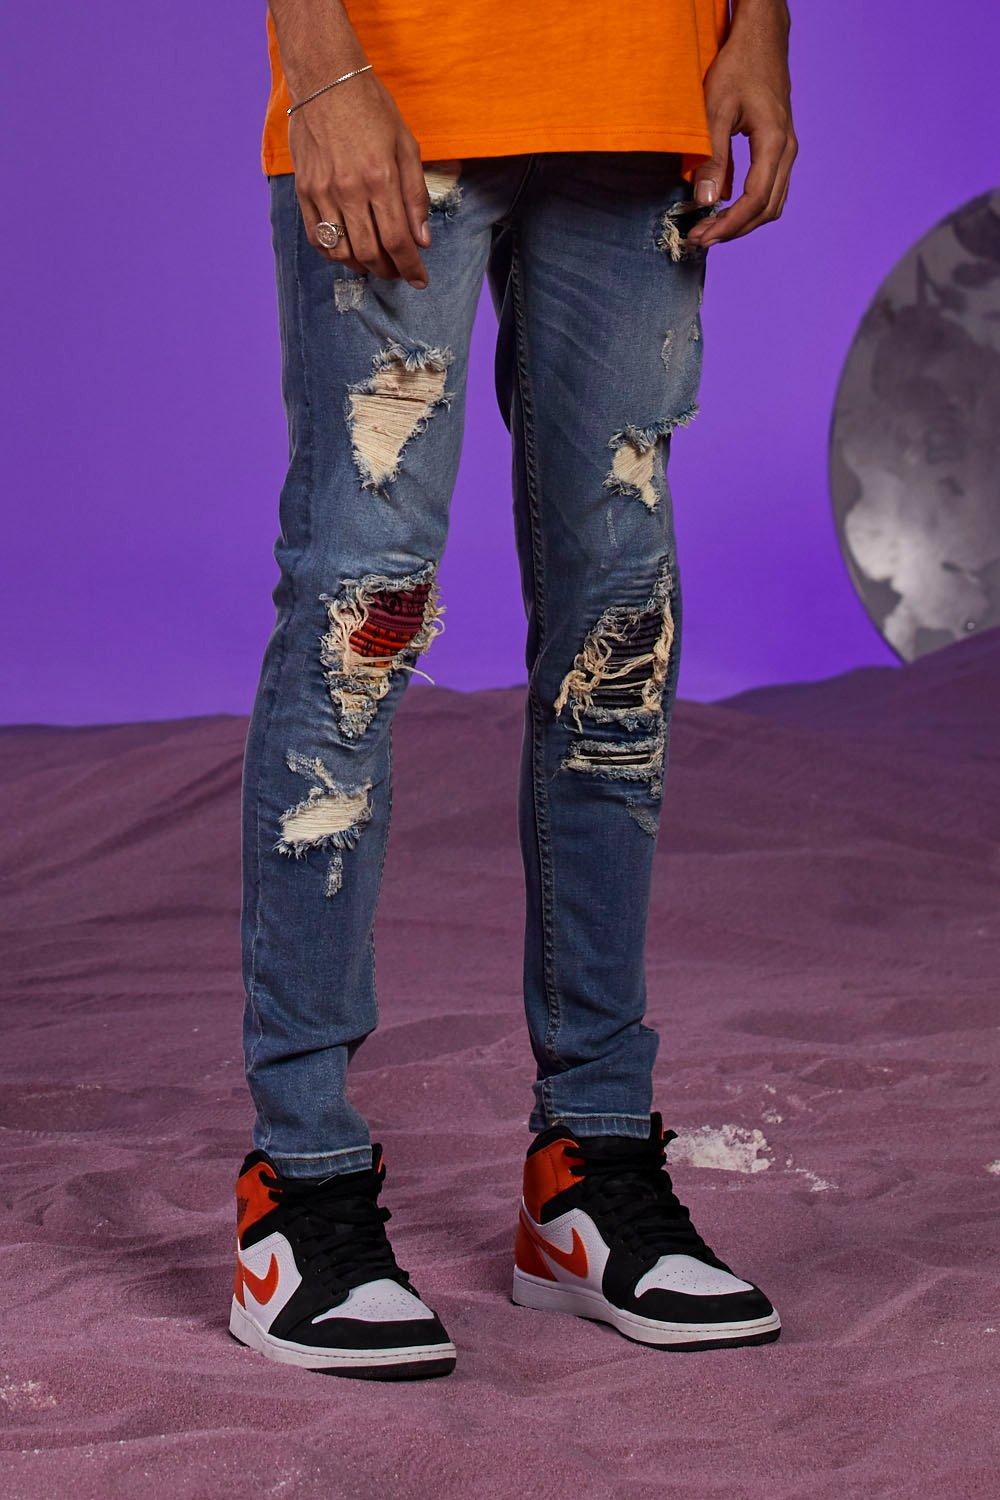 Trending Apparel New Men Ripped Blue Jeans with Bandana Print 